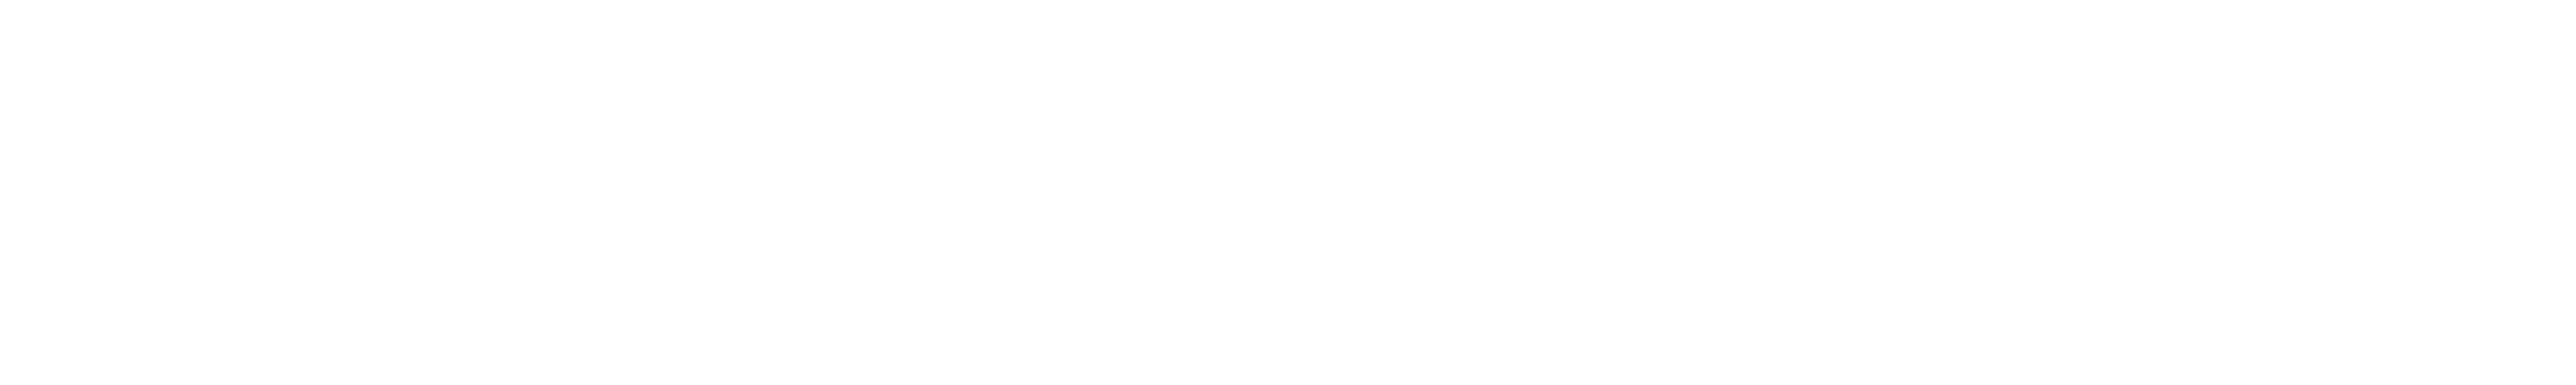 National Institutes of Health - Researching COVID to Enhance Recovery